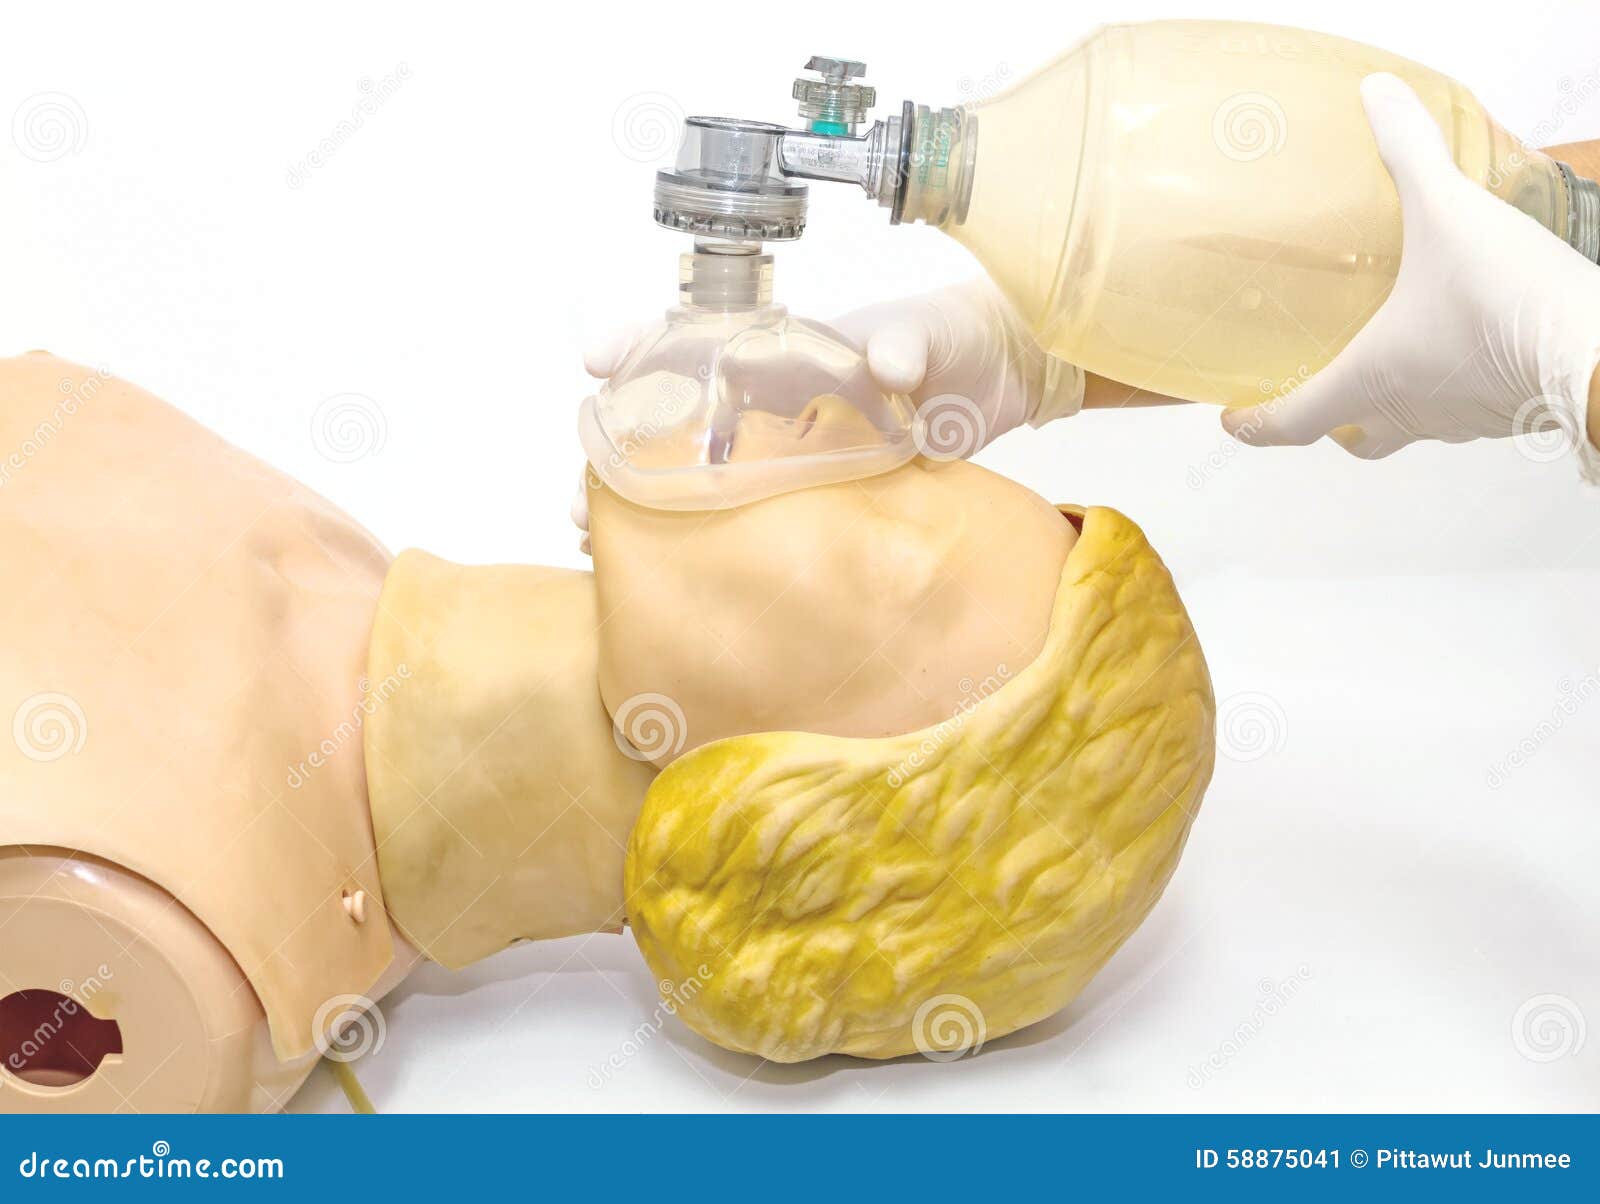 CareFusion AirLife Adult Disposable Self Inflating Resuscitation Device